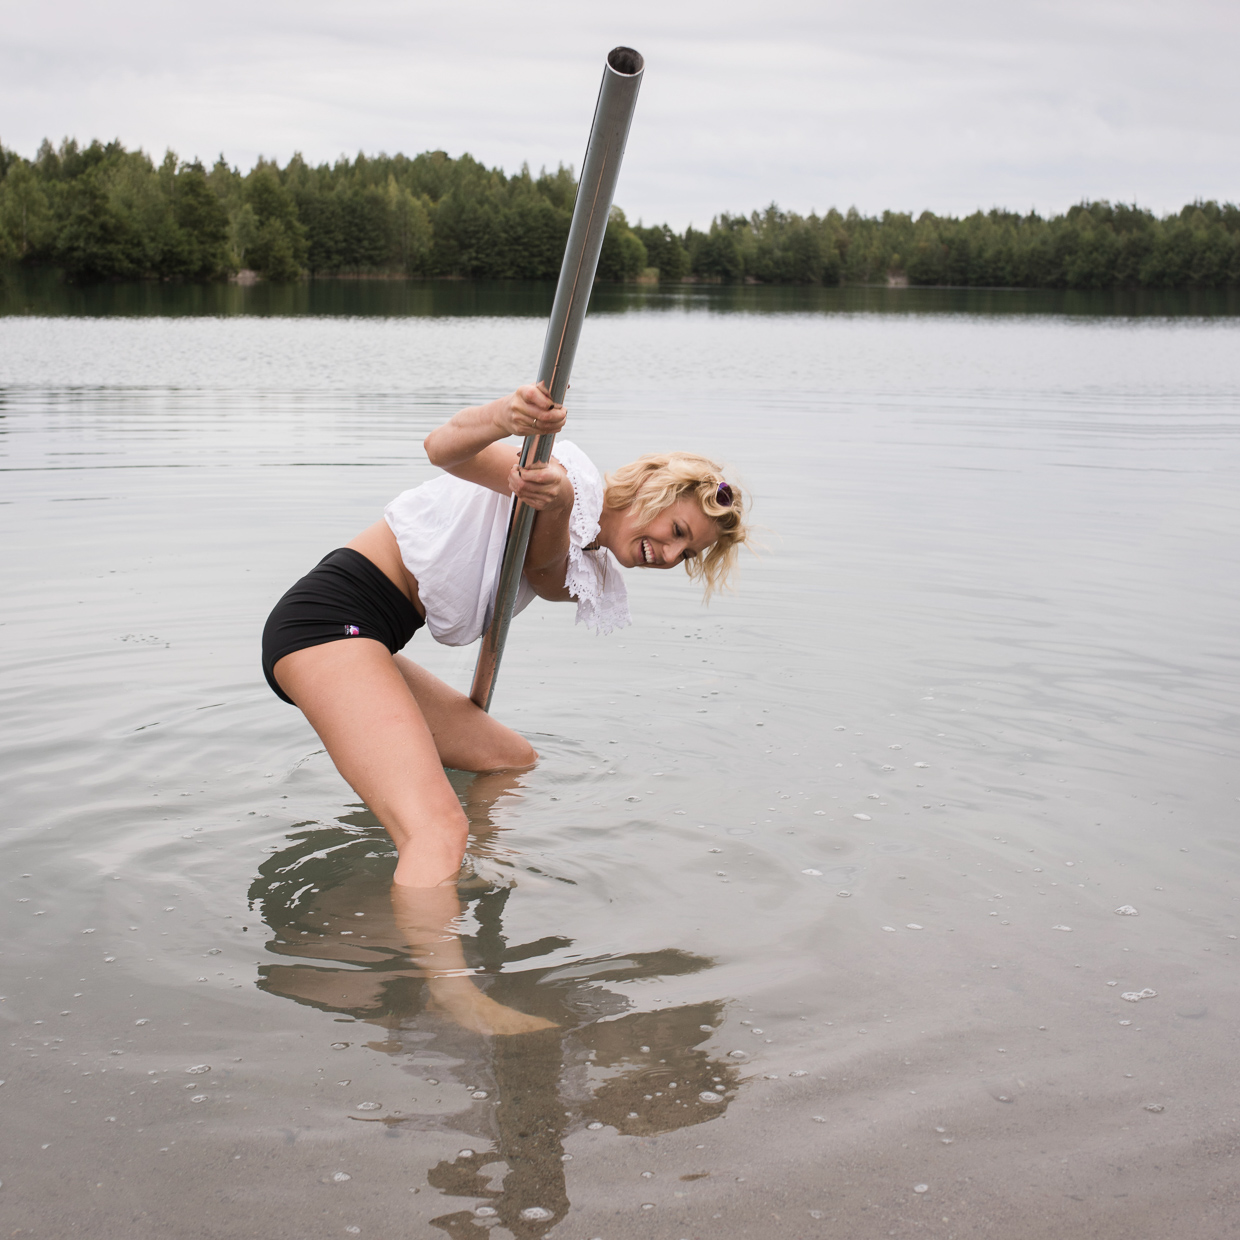 Lenita Larsson placing the pole in the water.